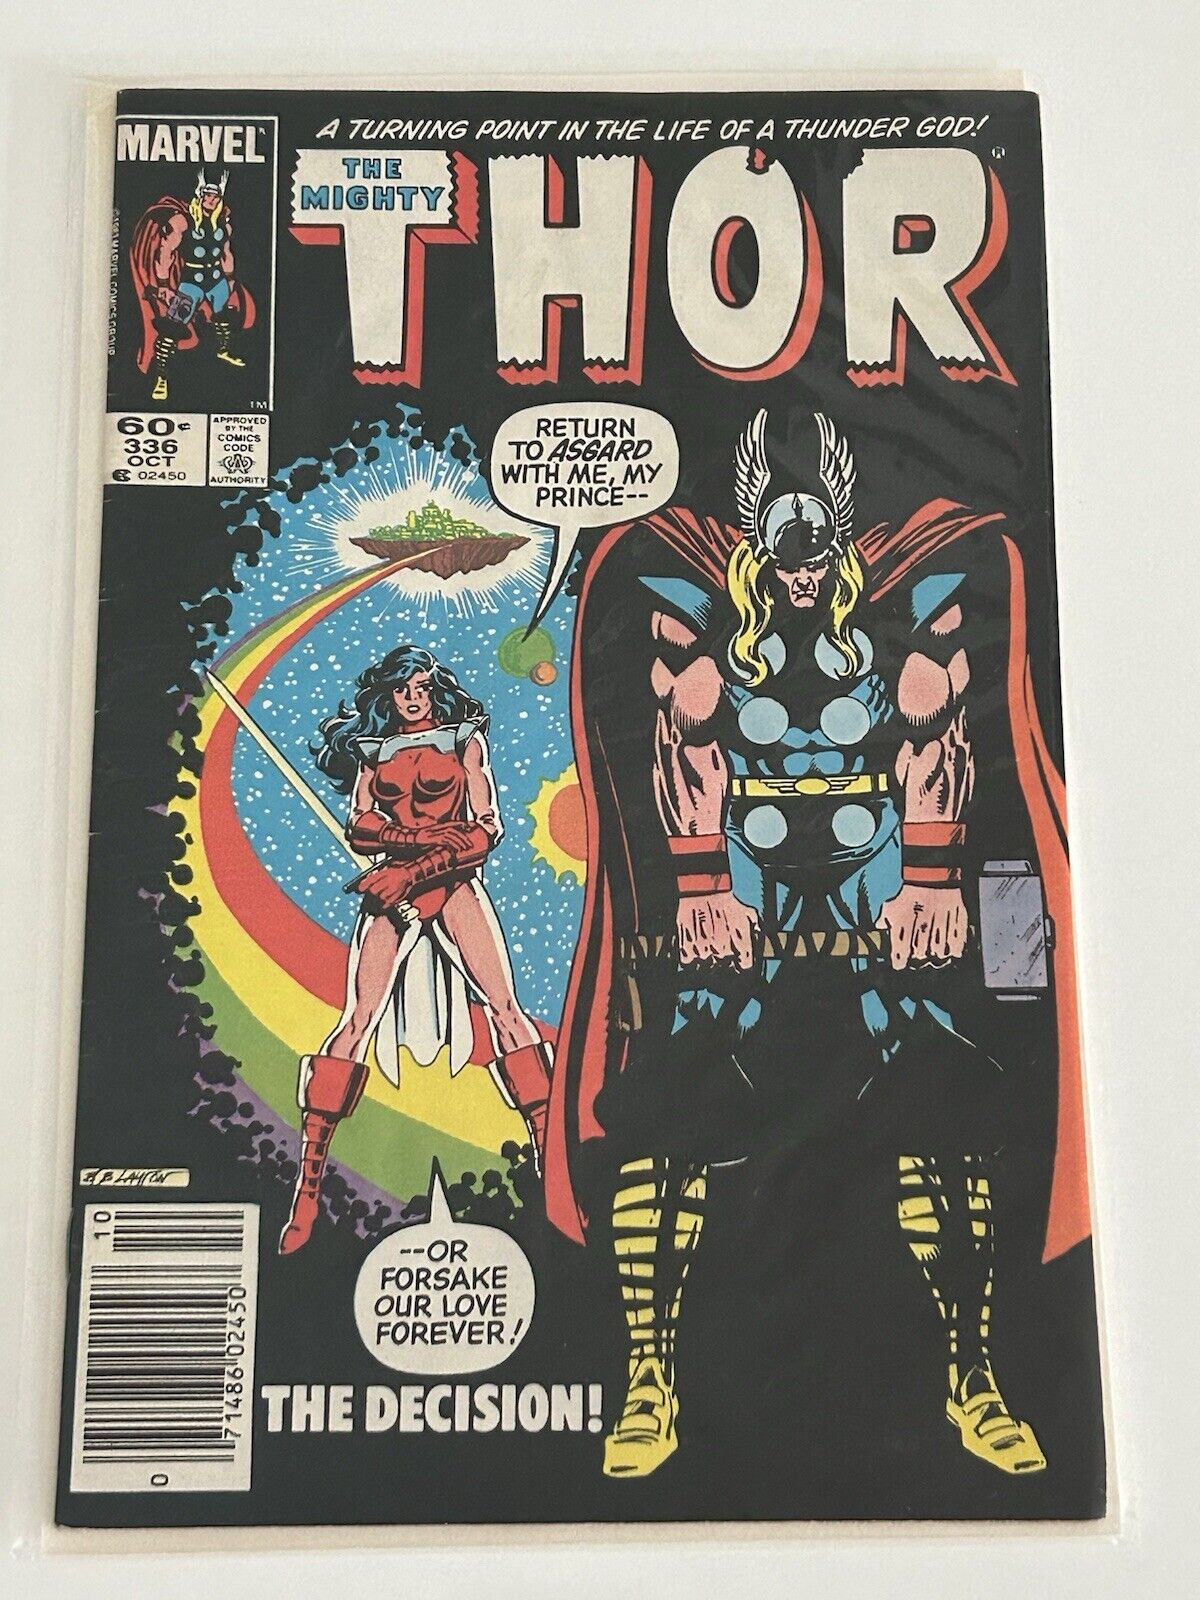 The Mighty Thor Vol.1 #336 October 1983 Marvel Comics *Newsstand*